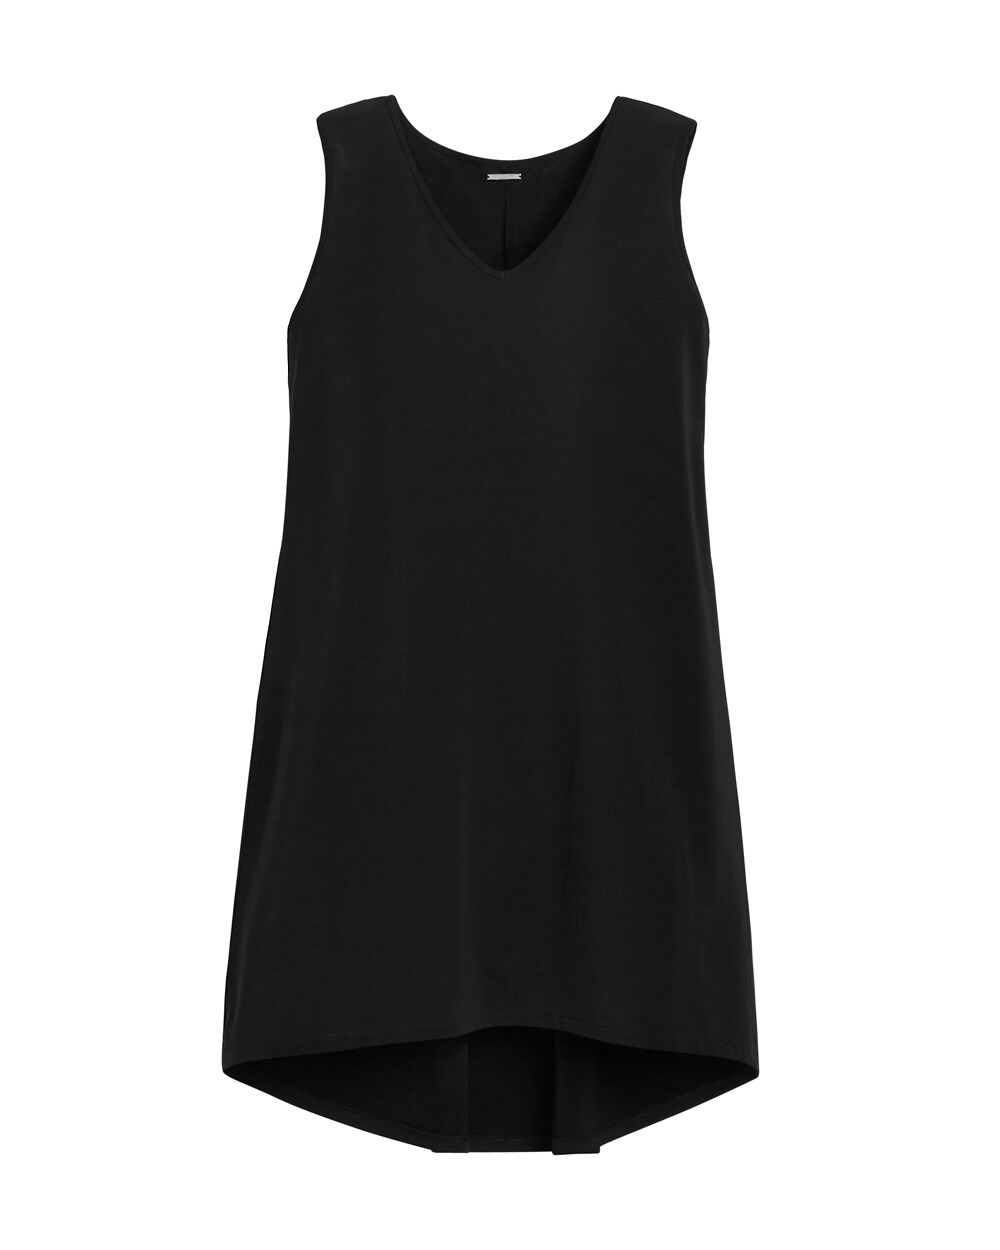 Black Label Tank - Black Label Collection - Women's Clothing - Chico's